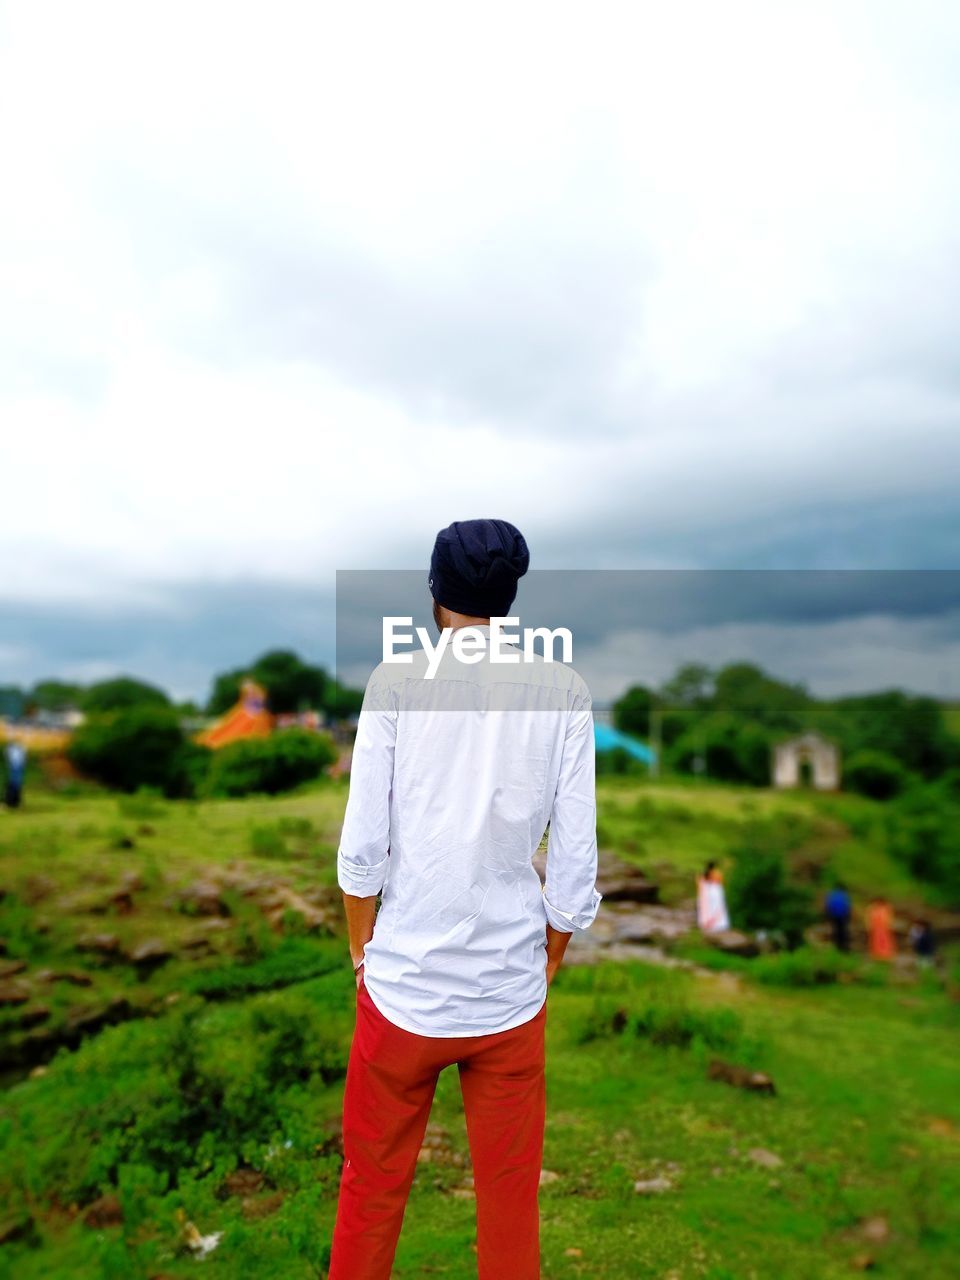 rear view, one person, sky, nature, plant, grass, standing, men, land, cloud, casual clothing, landscape, green, field, environment, adult, beauty in nature, day, leisure activity, lifestyles, outdoors, full length, rural scene, scenics - nature, non-urban scene, looking at view, person, meadow, child